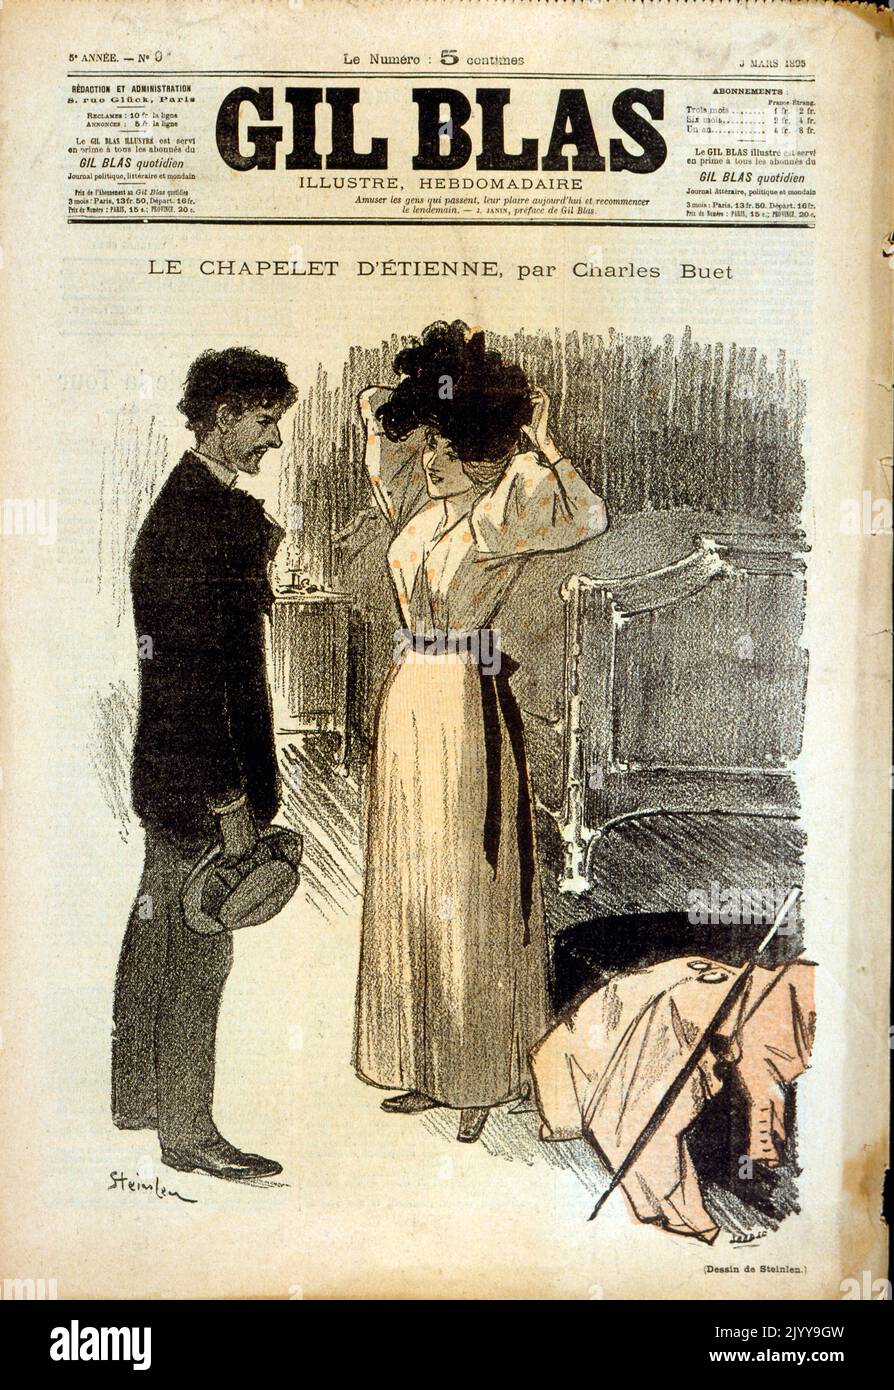 Black and white Illustration of a lady and gentleman standing in a bedroom. Headline 'Le Chapelet d'Etienne' by Charles Bouet. Illustration by Steinlen. Dated 3 March 1905. Stock Photo